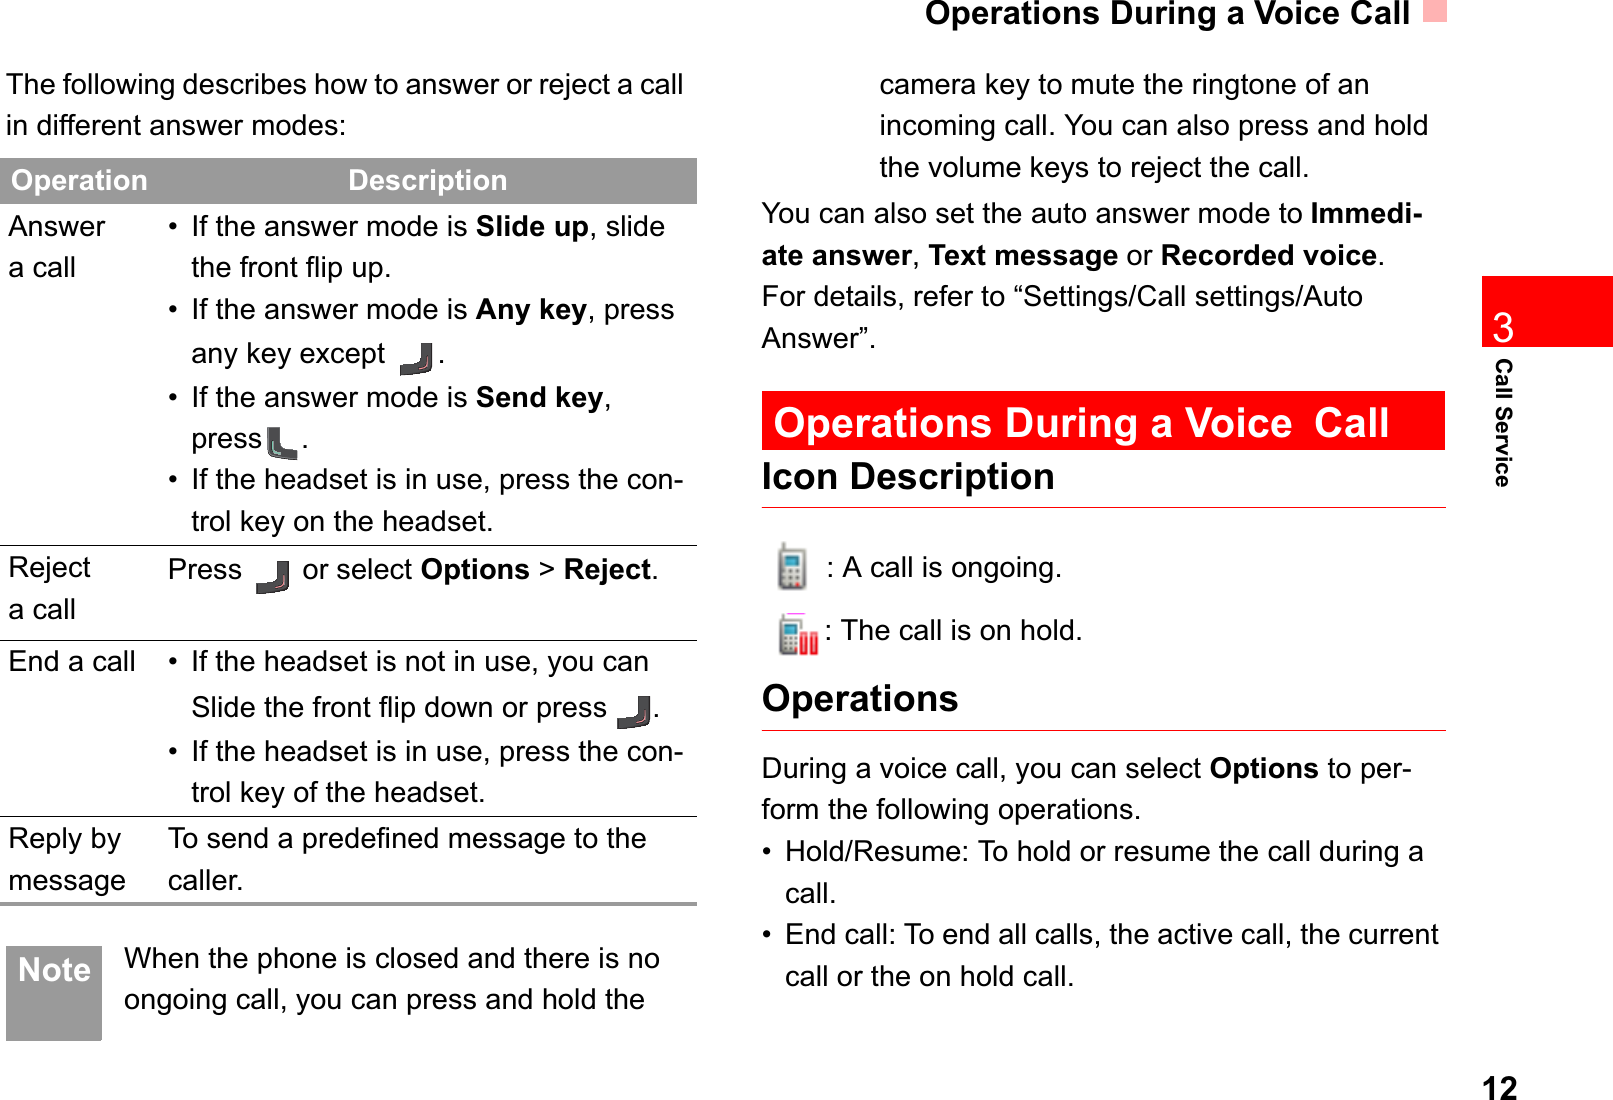 Operations During a Voice Call12Call Service3The following describes how to answer or reject a call in different answer modes: Note When the phone is closed and there is no ongoing call, you can press and hold the camera key to mute the ringtone of an incoming call. You can also press and hold the volume keys to reject the call.You can also set the auto answer mode to Immedi-ate answer,Text message or Recorded voice.For details, refer to “Settings/Call settings/Auto Answer”. Operations During a VoiceCallIcon Description: A call is ongoing.: The call is on hold.OperationsDuring a voice call, you can select Options to per-form the following operations.• Hold/Resume: To hold or resume the call during a call.• End call: To end all calls, the active call, the current call or the on hold call.Operation DescriptionAnswera call• If the answer mode is Slide up, slide the front flip up.• If the answer mode is Any key, press any key except  .• If the answer mode is Send key,press .• If the headset is in use, press the con-trol key on the headset.Rejecta callPress   or select Options &gt; Reject.End a call • If the headset is not in use, you can Slide the front flip down or press  .• If the headset is in use, press the con-trol key of the headset.Reply by messageTo send a predefined message to the caller.